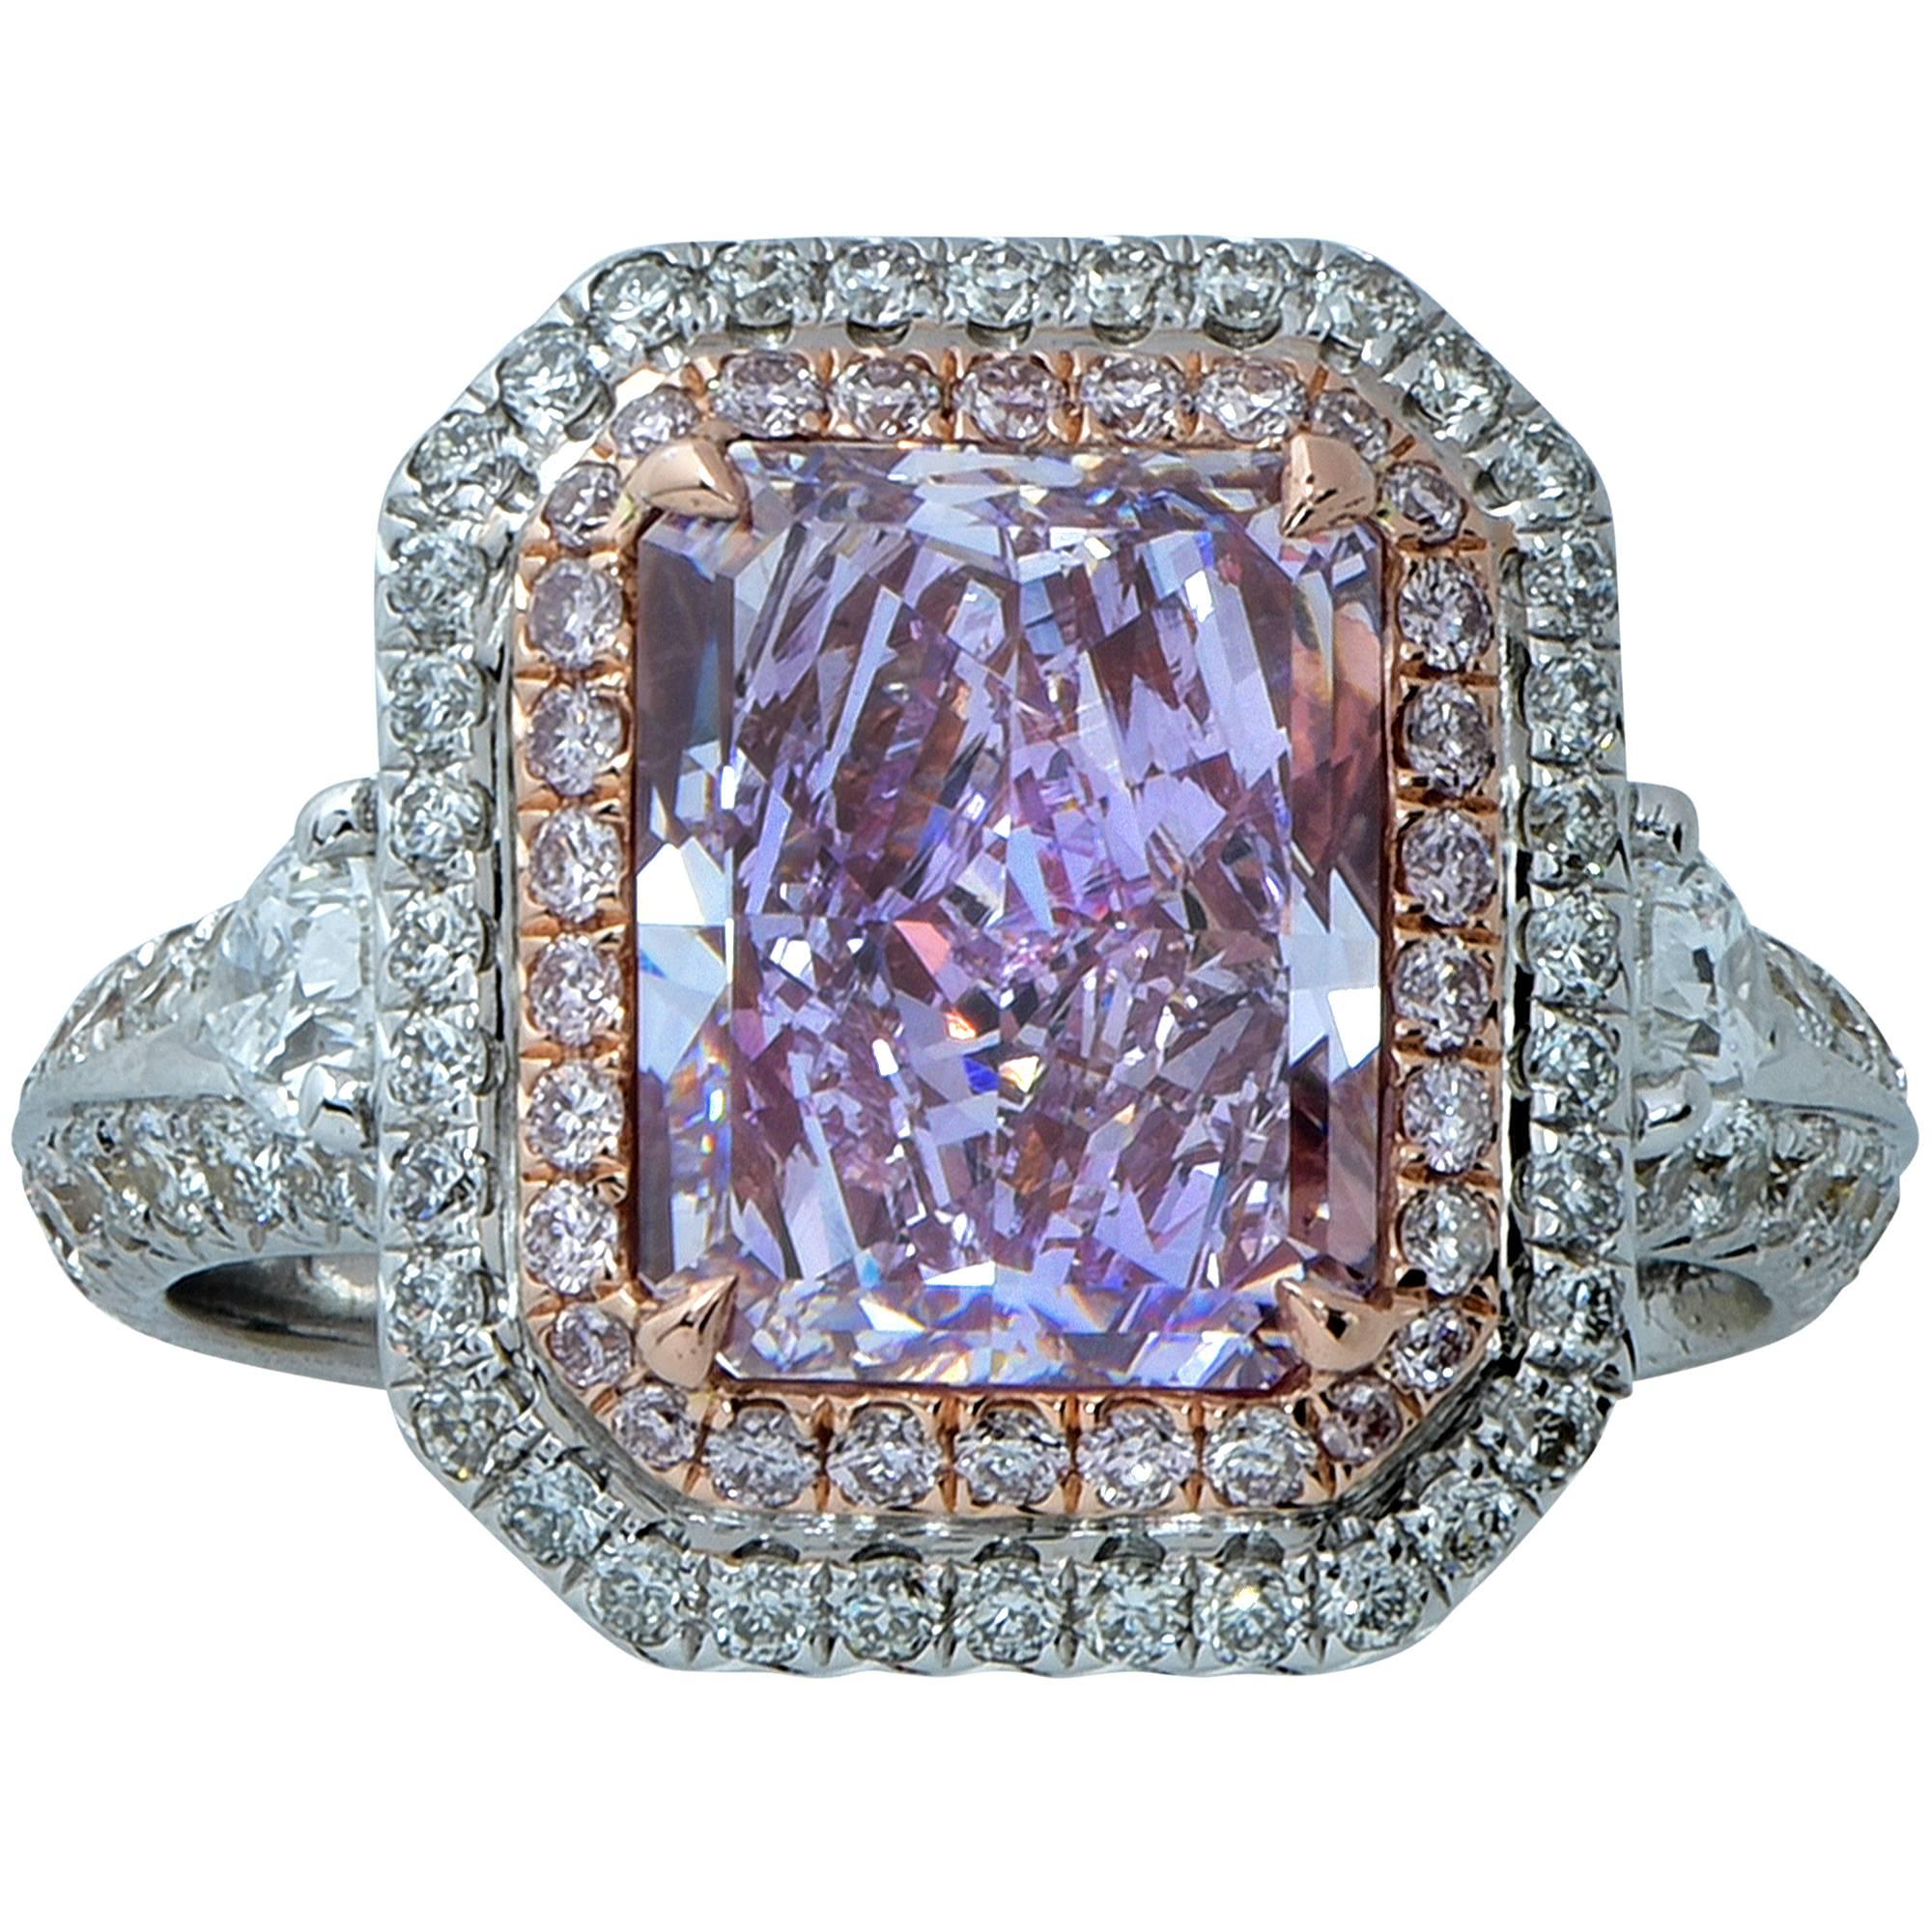 Alluring platinum and 18k rose gold engagement ring featuring a jaw dropping GIA graded 3.34ct natural fancy pinkish purple radiant cut diamond with a clarity grade of VS2. The center diamond is surrounded by 28 round brilliant cut pink diamonds